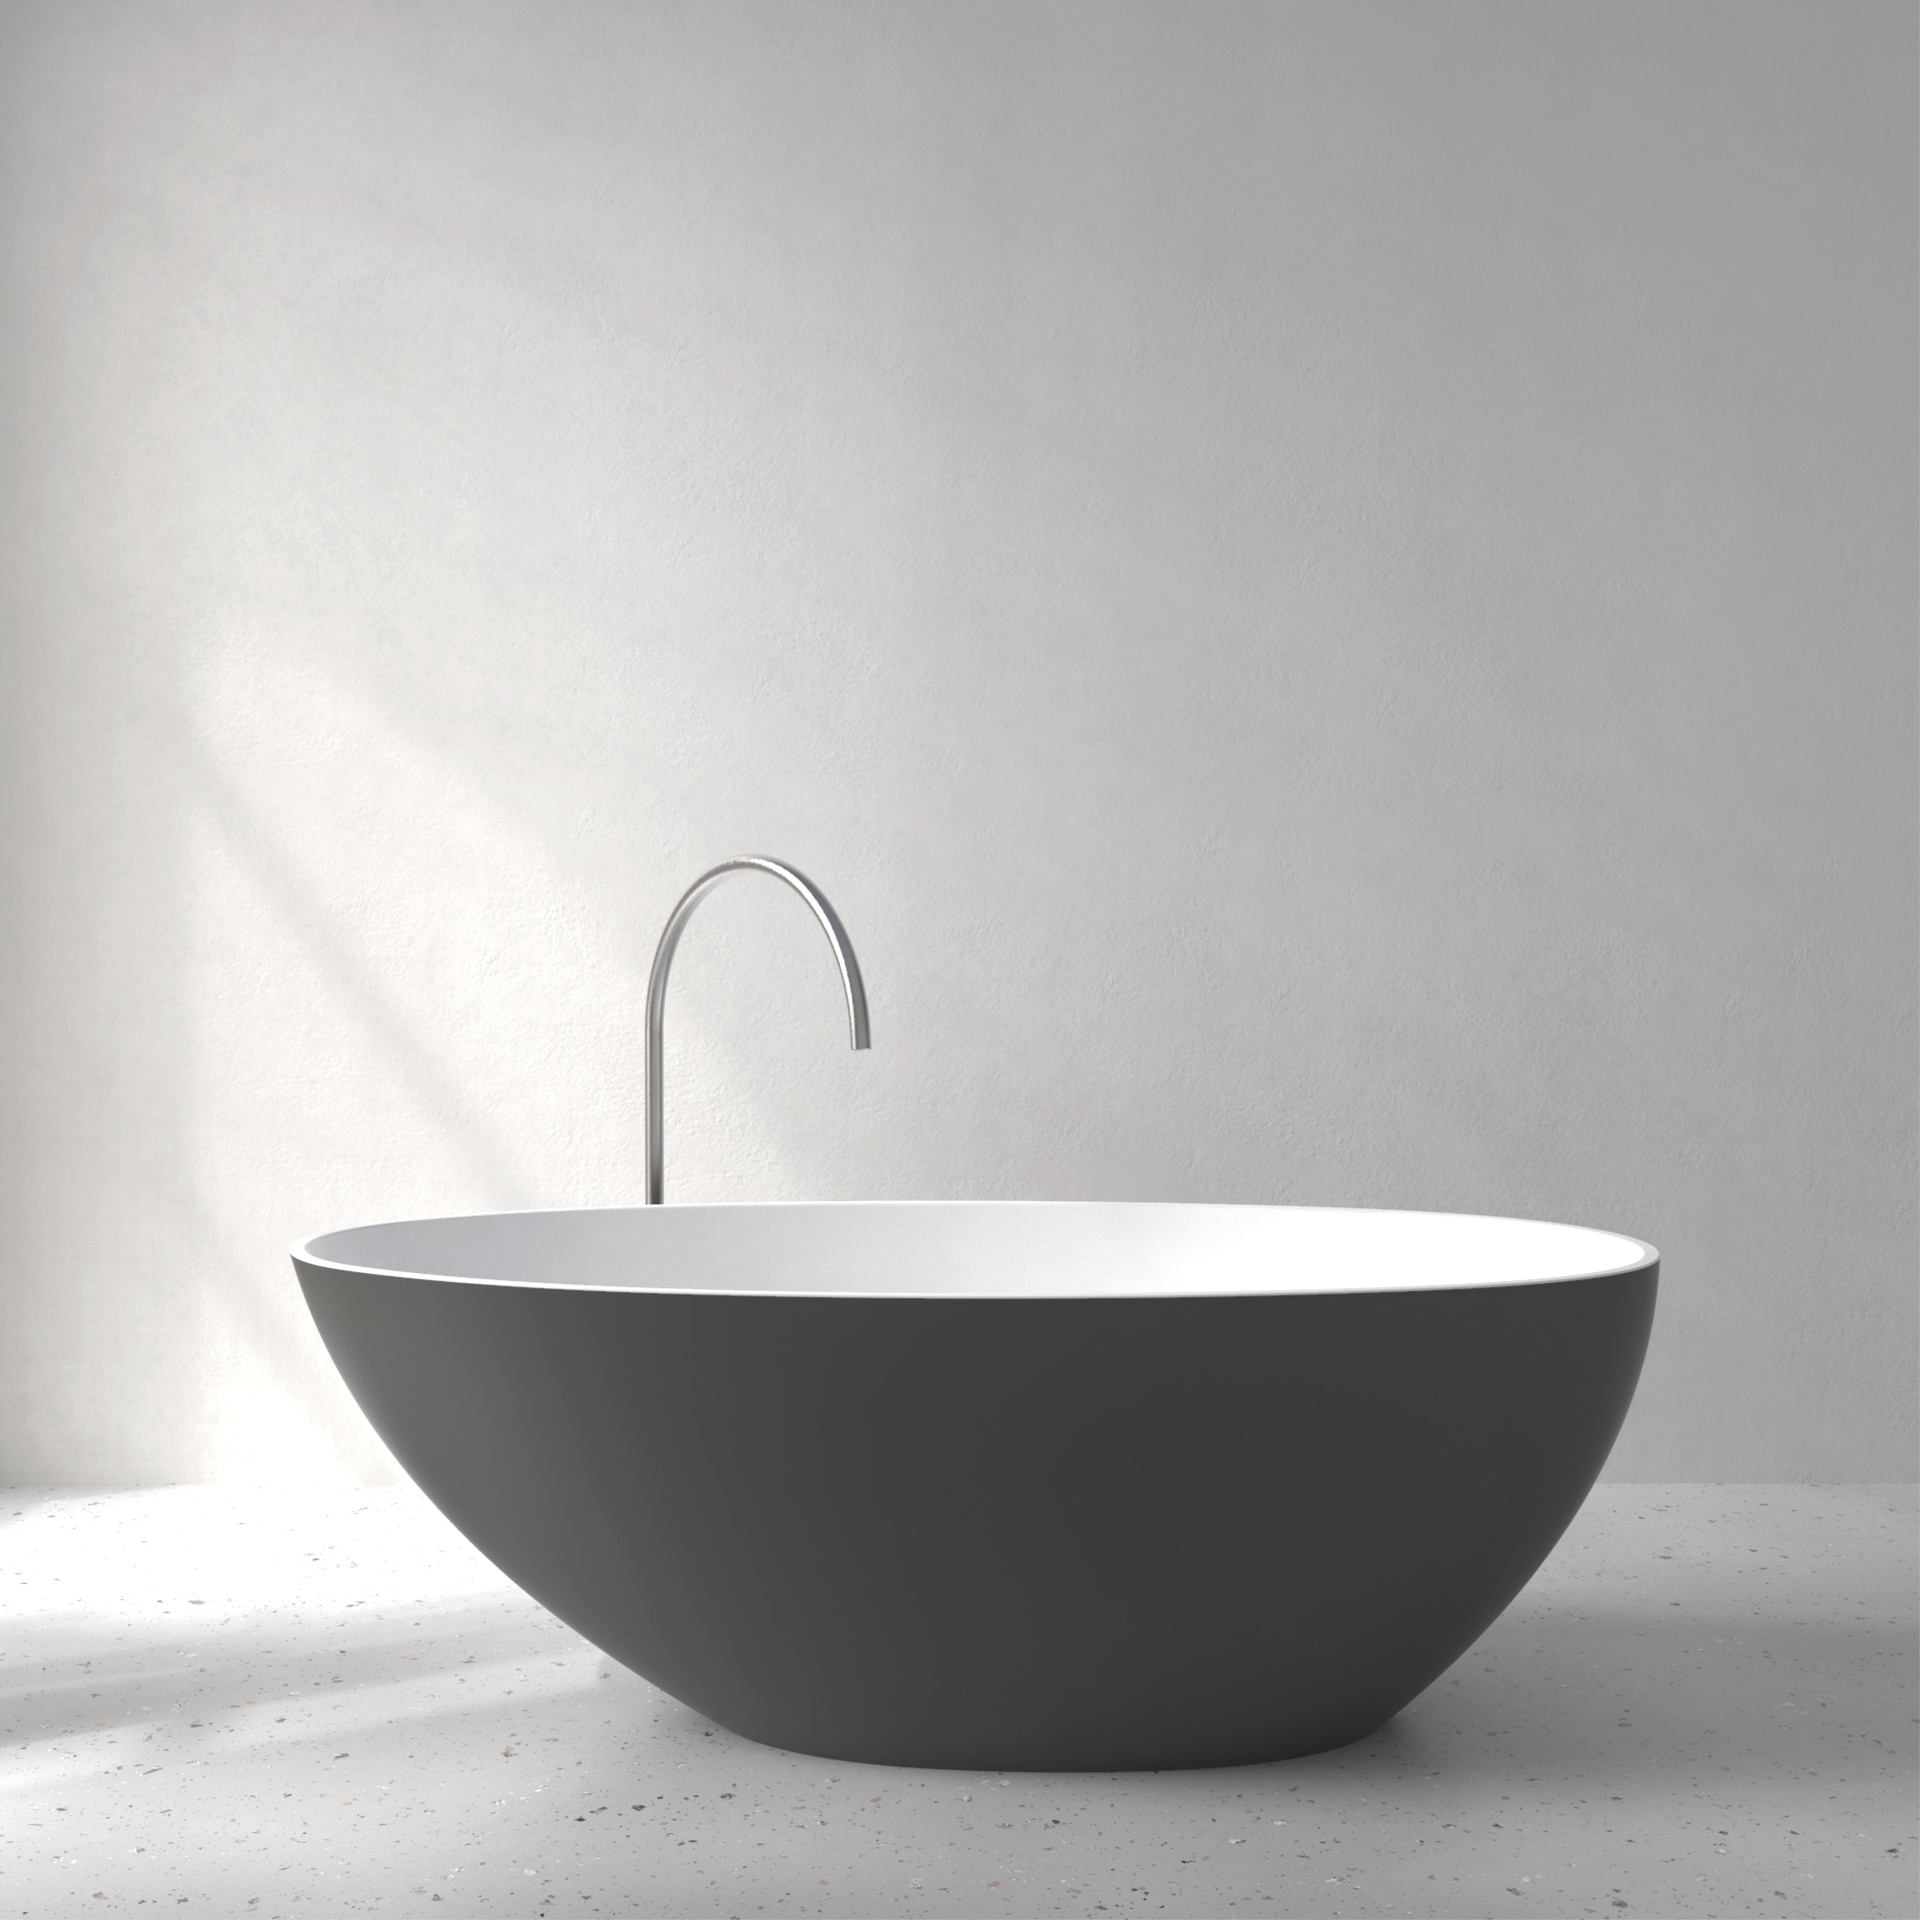 [FEA02-SAGREY] Ease bath with Soft Touch (Anthracite Grey)